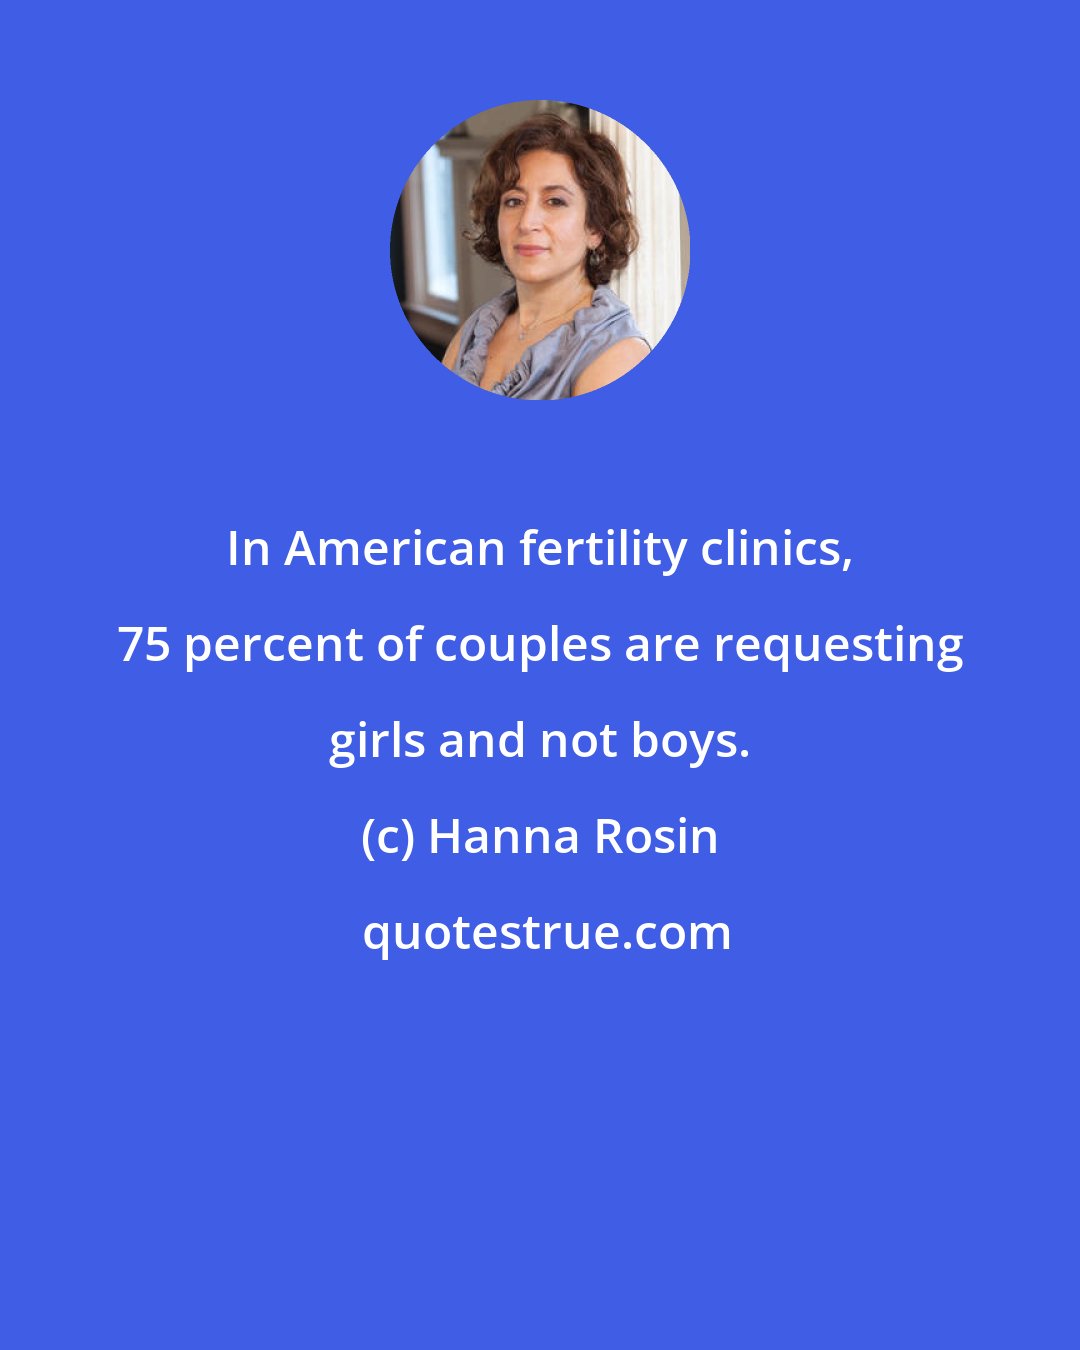 Hanna Rosin: In American fertility clinics, 75 percent of couples are requesting girls and not boys.